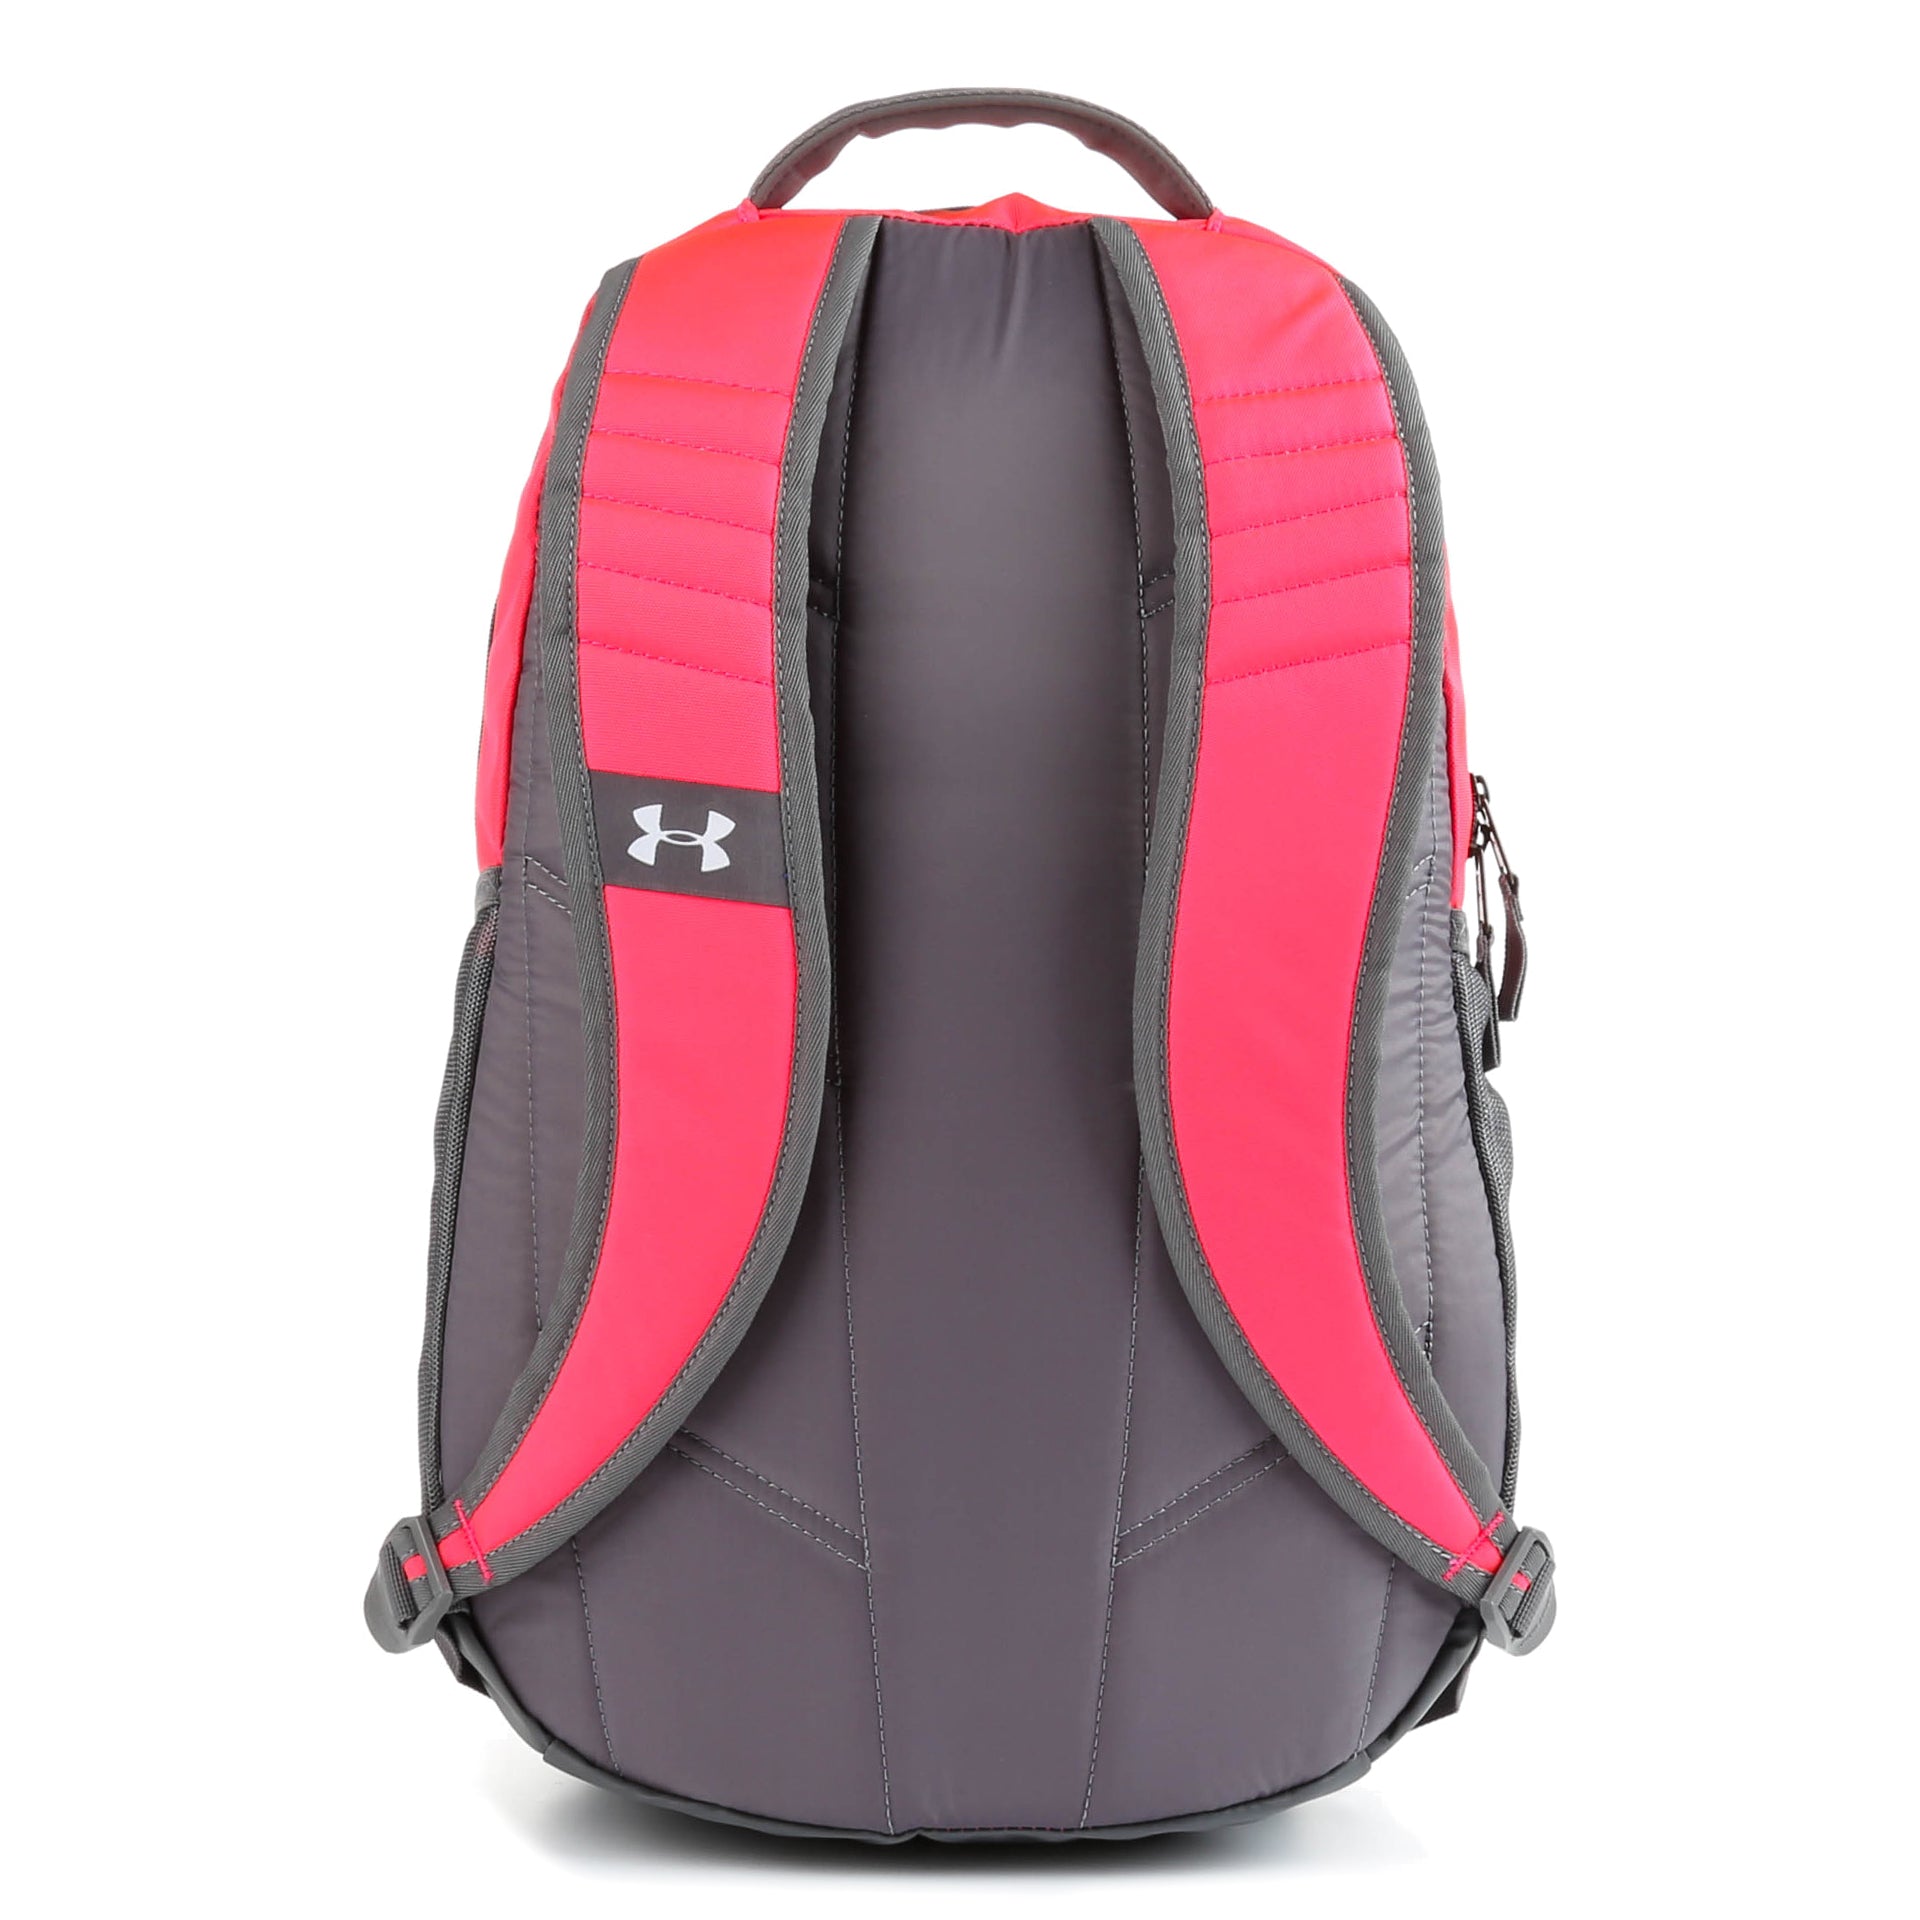 Under Armour Hot Pink backpack - Good Condition